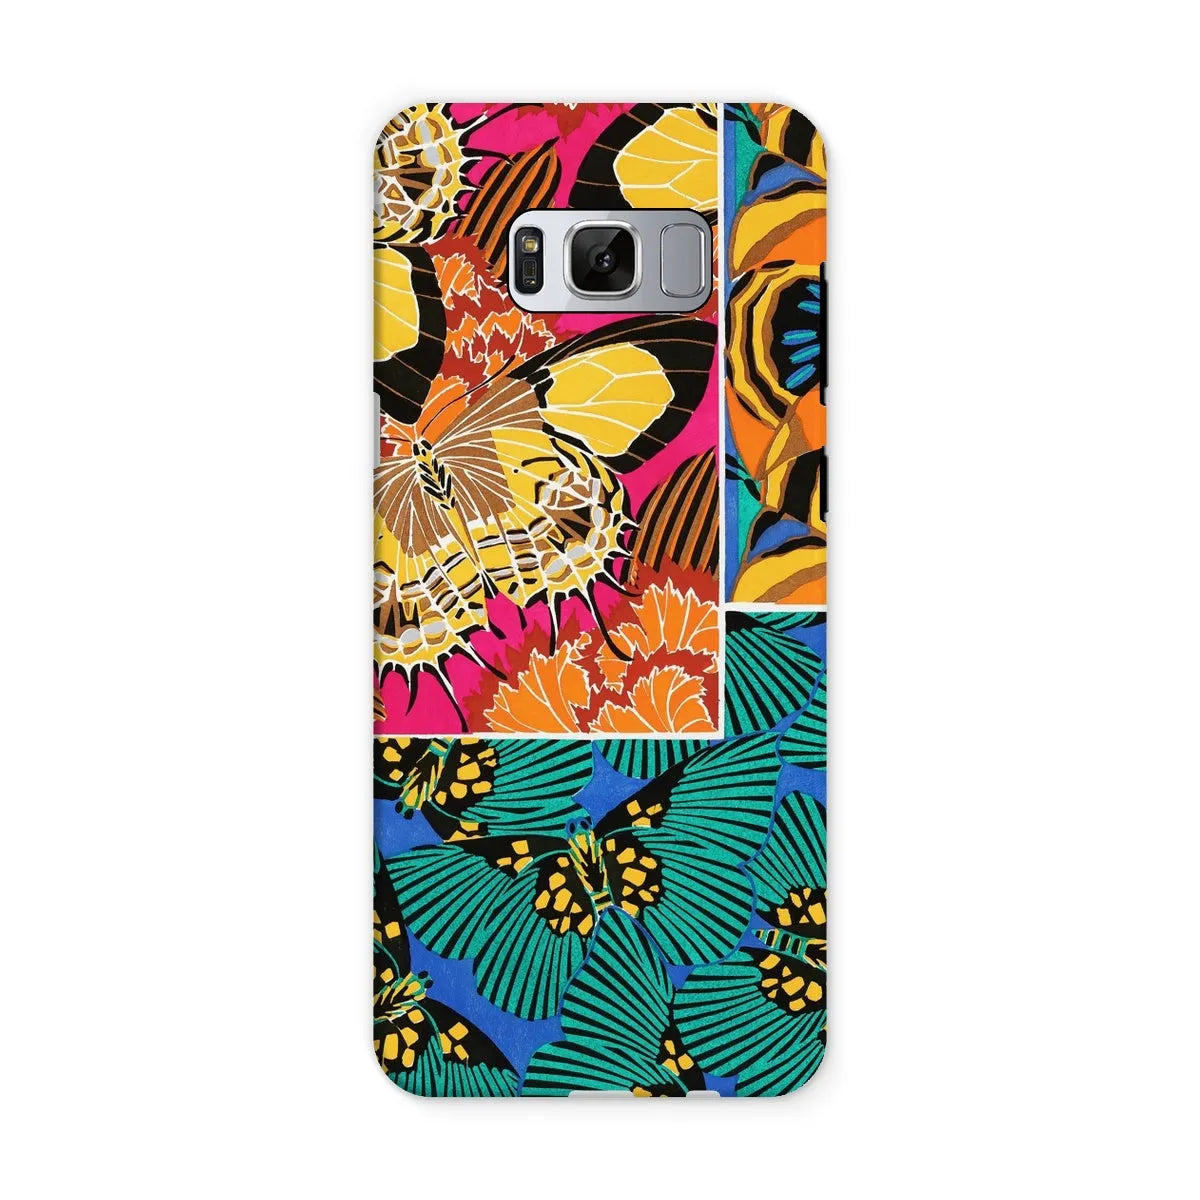 Rainbow Butterfly Aesthetic Art Phone Case - E.a. Seguy - Samsung Galaxy S8 / Matte - Mobile Phone Cases - Aesthetic Art